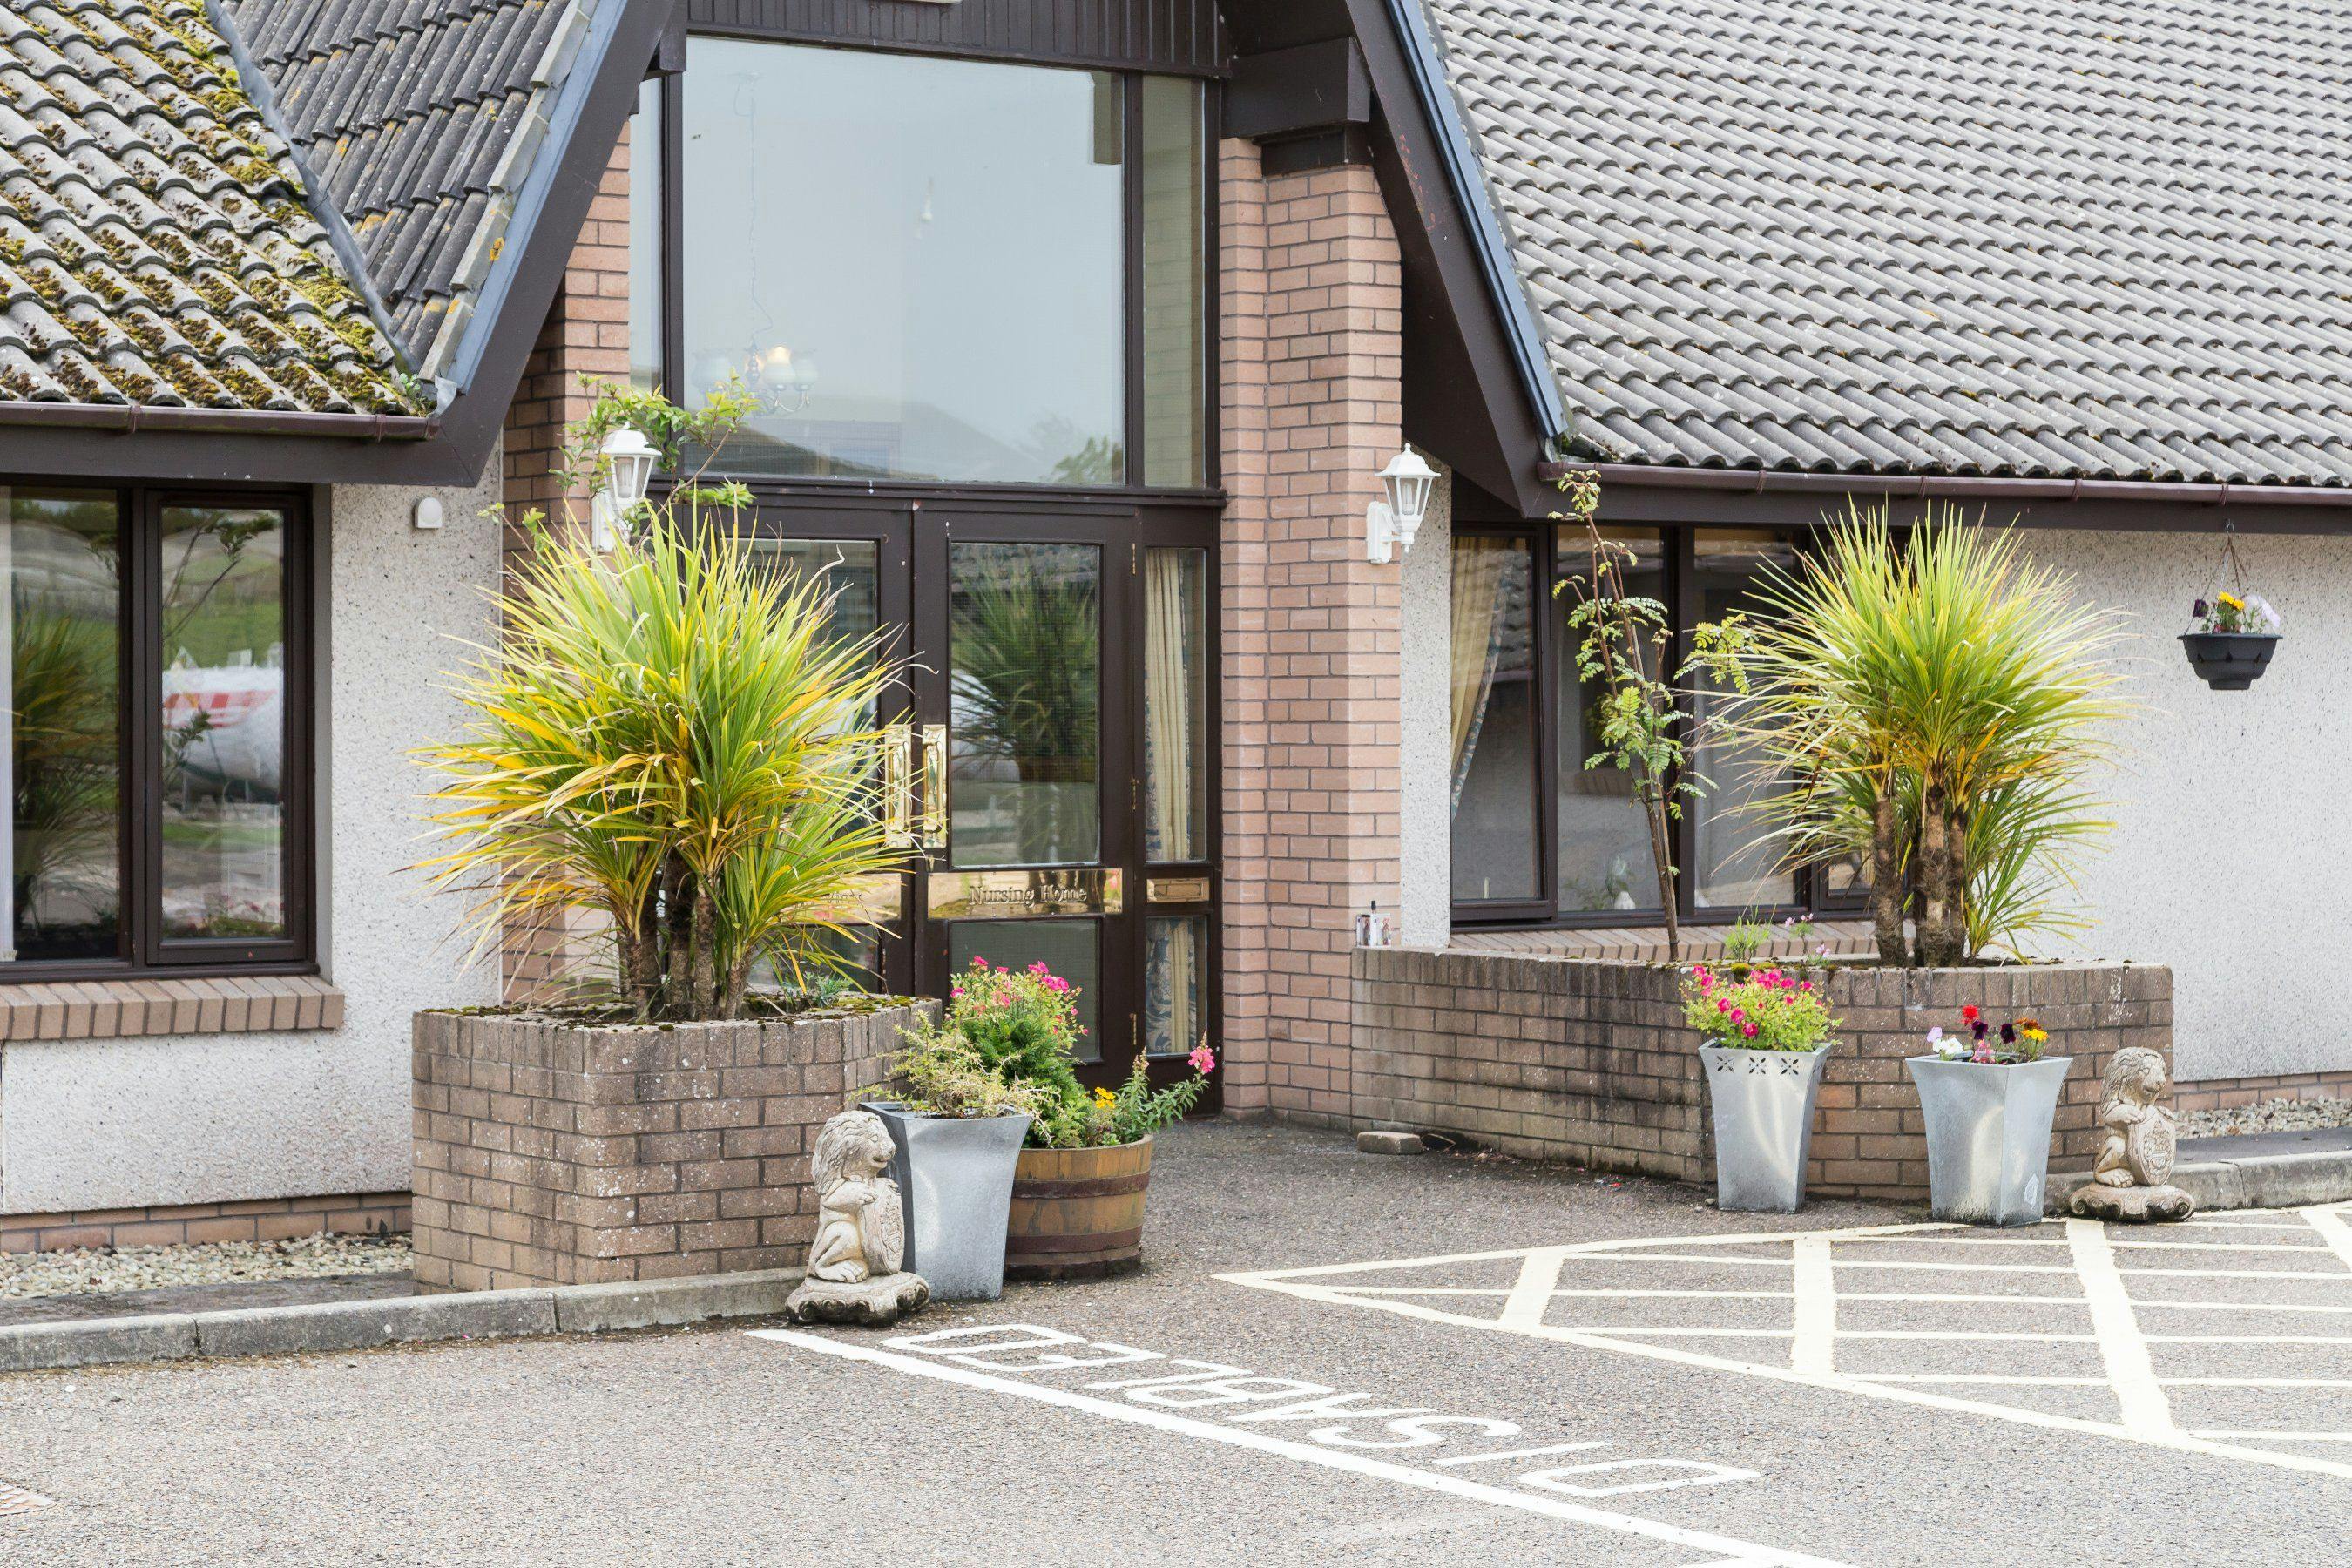 Exterior of Pentland View Care Home in Thurso, Highland